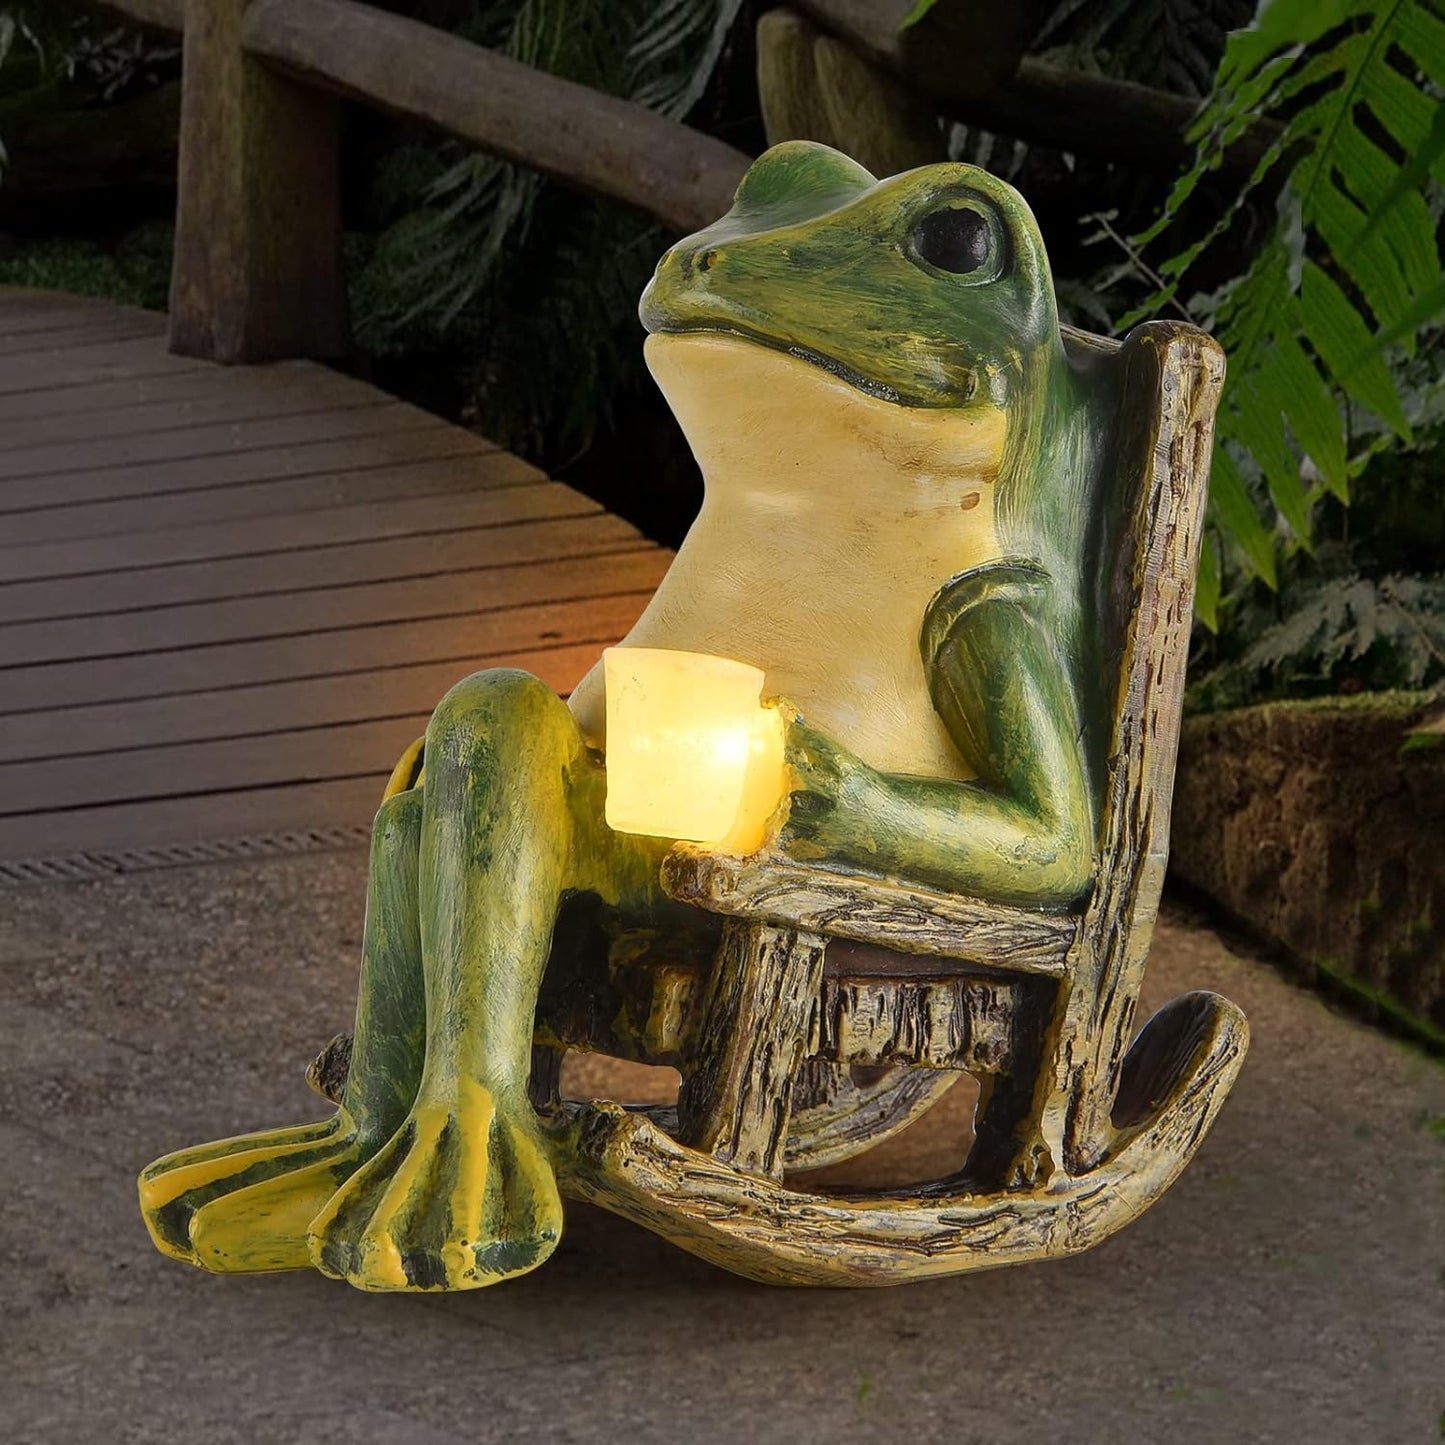 Solar-Powered Miniature Frog Garden Statue: Enchanting  Accessories for Outdoor and Indoor Spaces -  Art for Your Patio, Yard, and Lawn Ornament - Perfect Housewarming Gift (3.89" x 2.36" x 3.93")